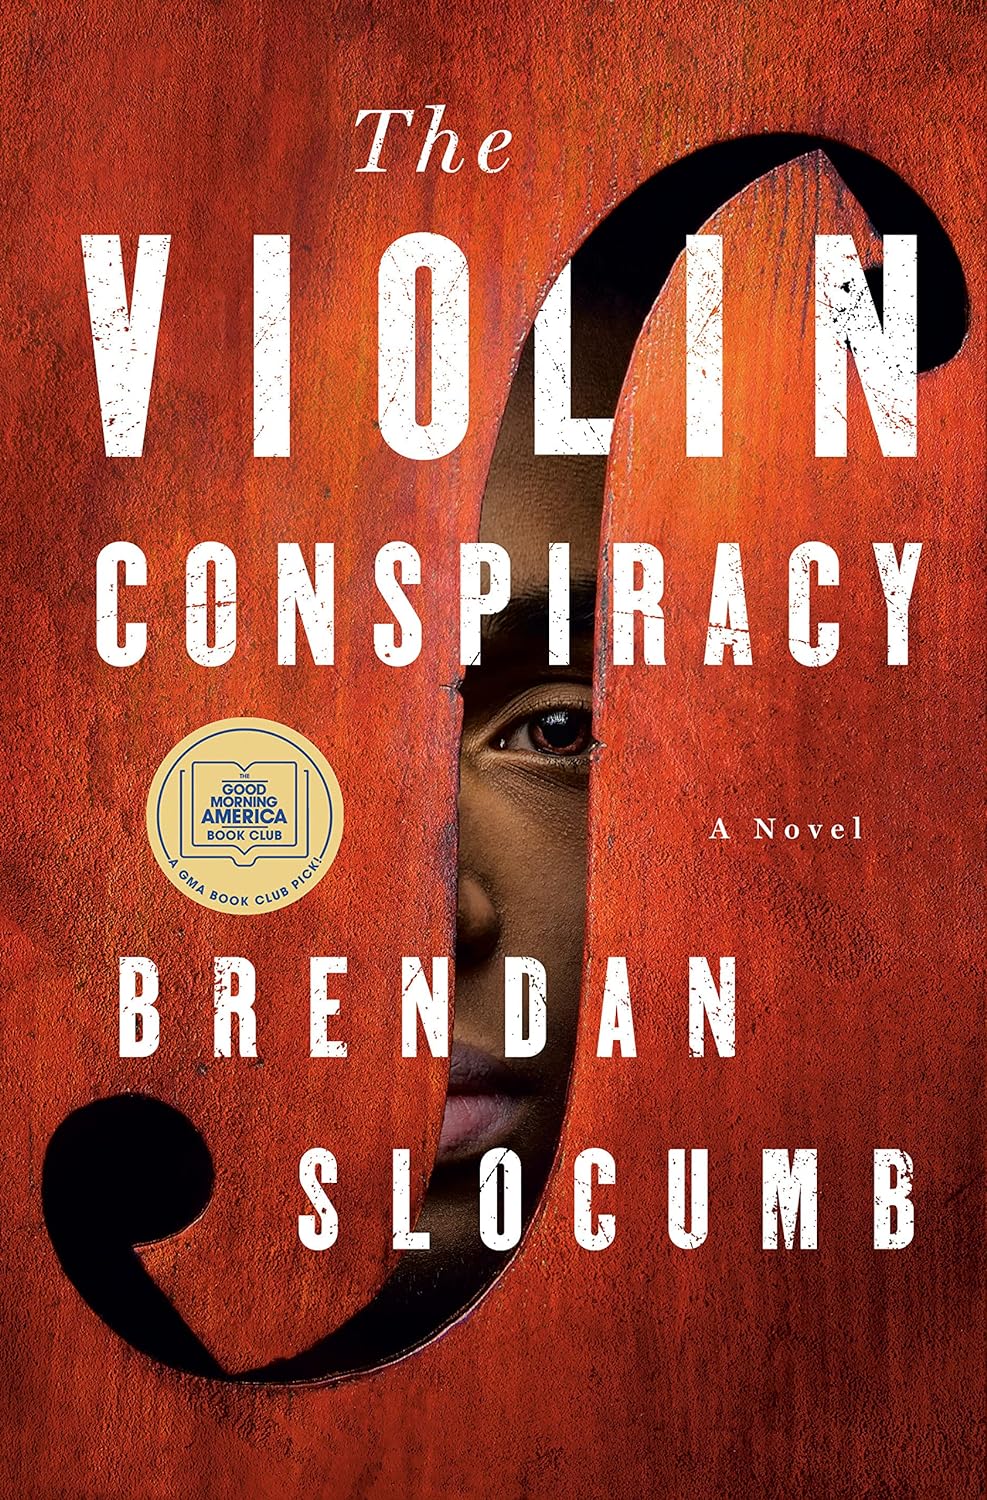 Image for "The Violin Conspiracy: A Novel"